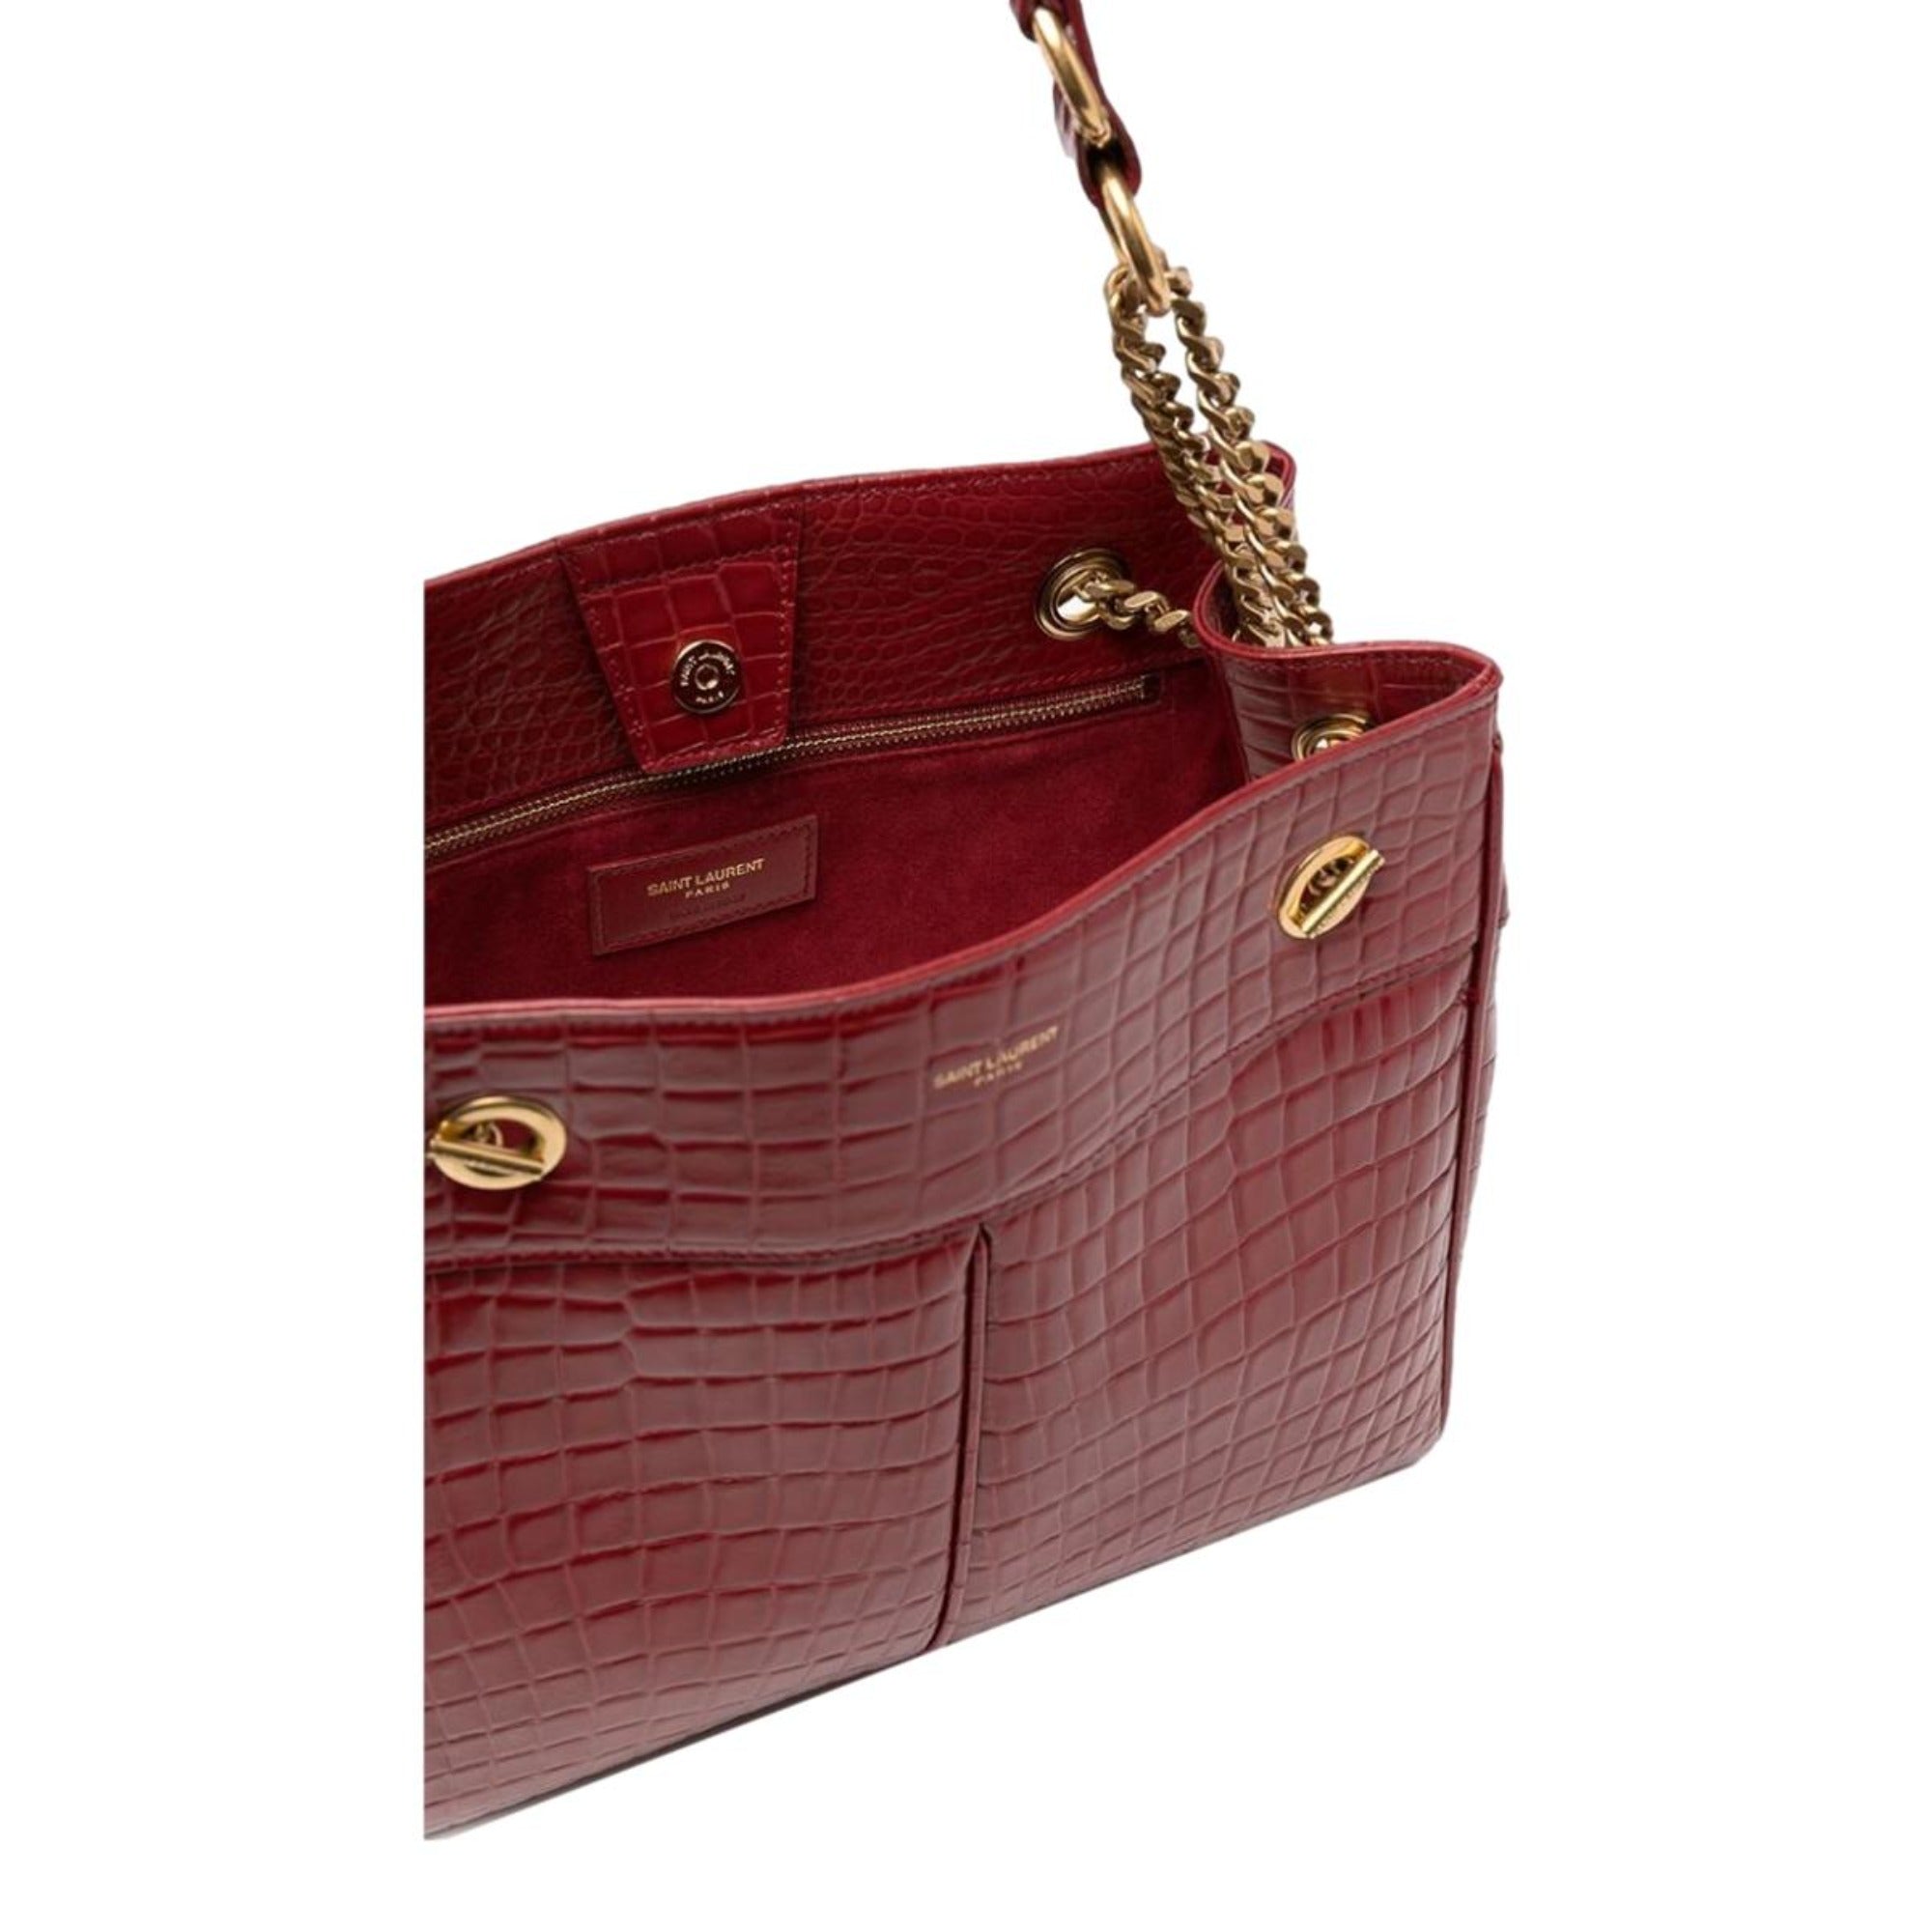 Saint Laurent Claude Red Leather Cocco Embossed Shoulder Bag 640281 at_Queen_Bee_of_Beverly_Hills